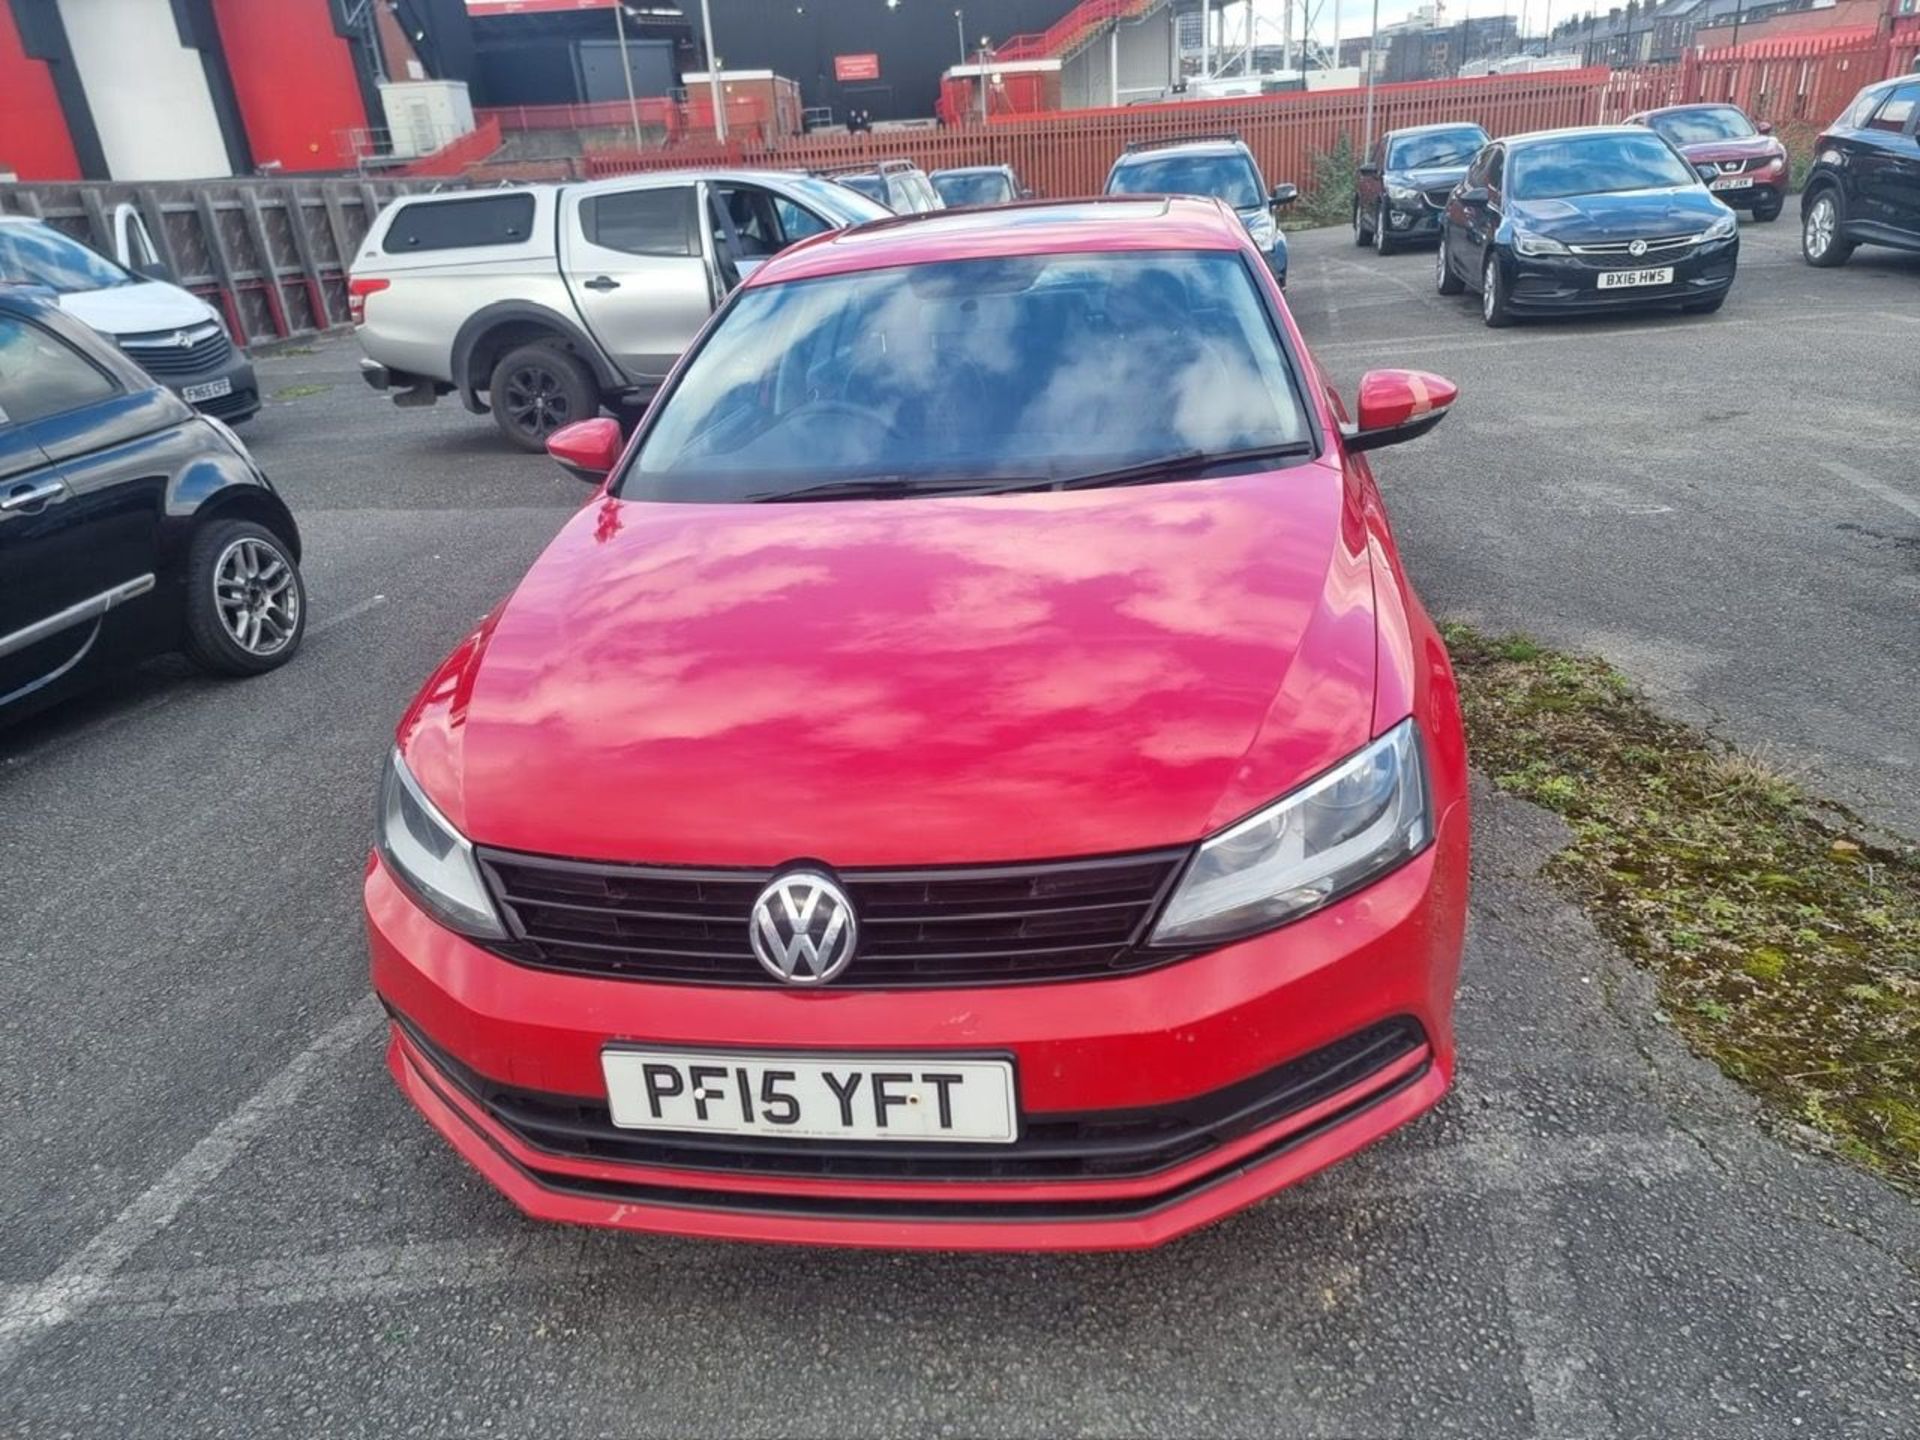 PF15 YFTVOLKSWAGEN JETTA 1.4 TSI 125 S Saloon. Date of registration: 21/07/2015 Comes with 1 key - Image 4 of 8